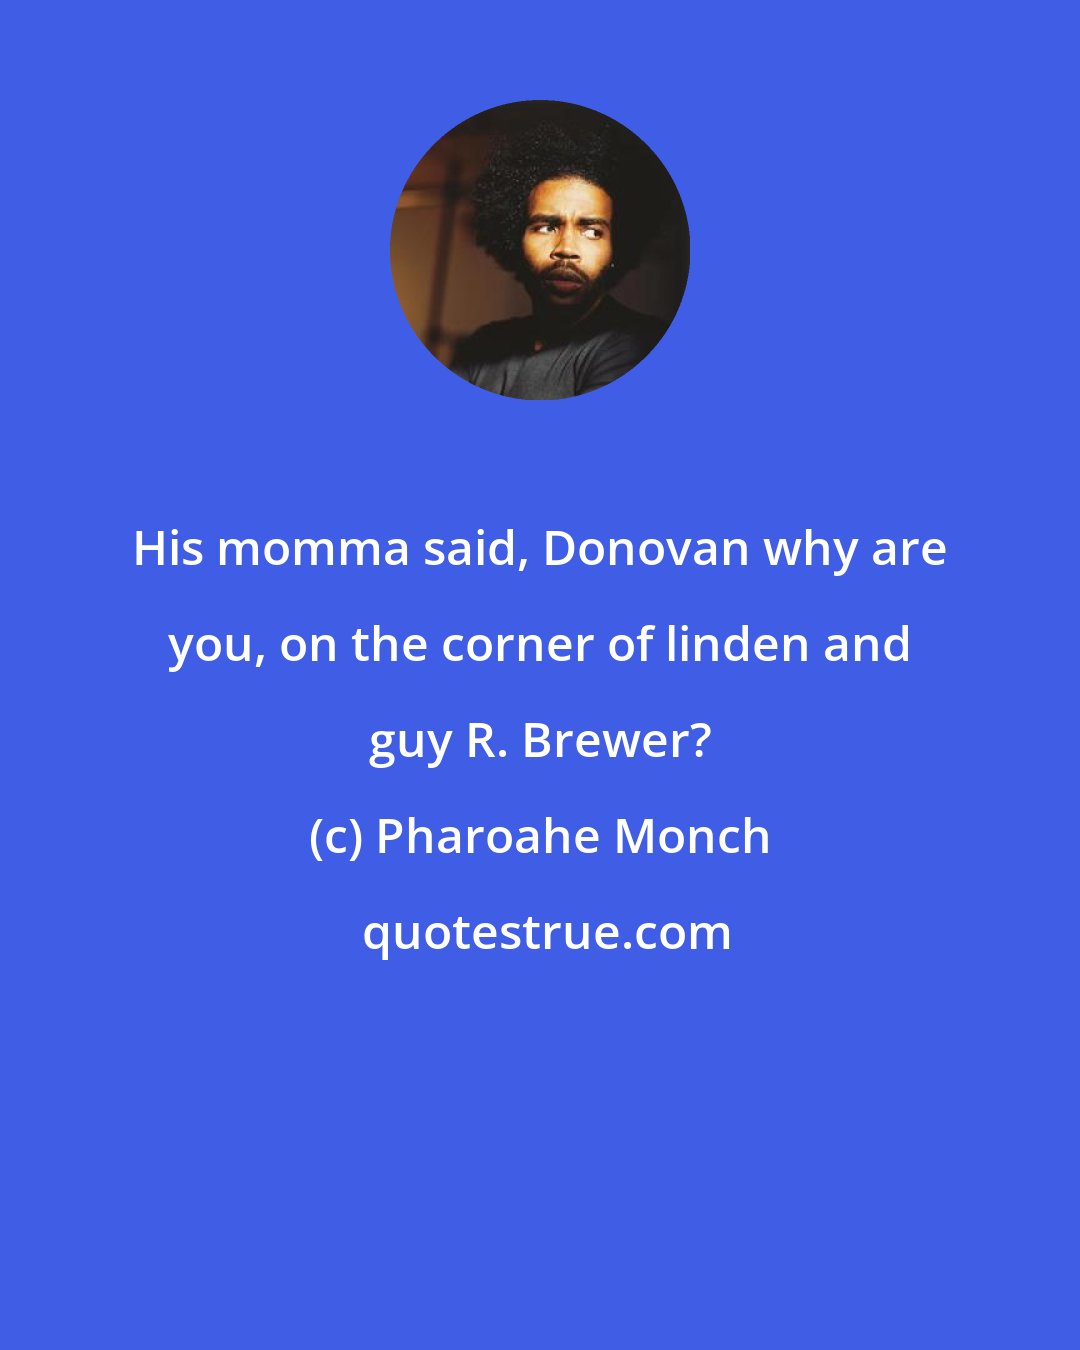 Pharoahe Monch: His momma said, Donovan why are you, on the corner of linden and guy R. Brewer?